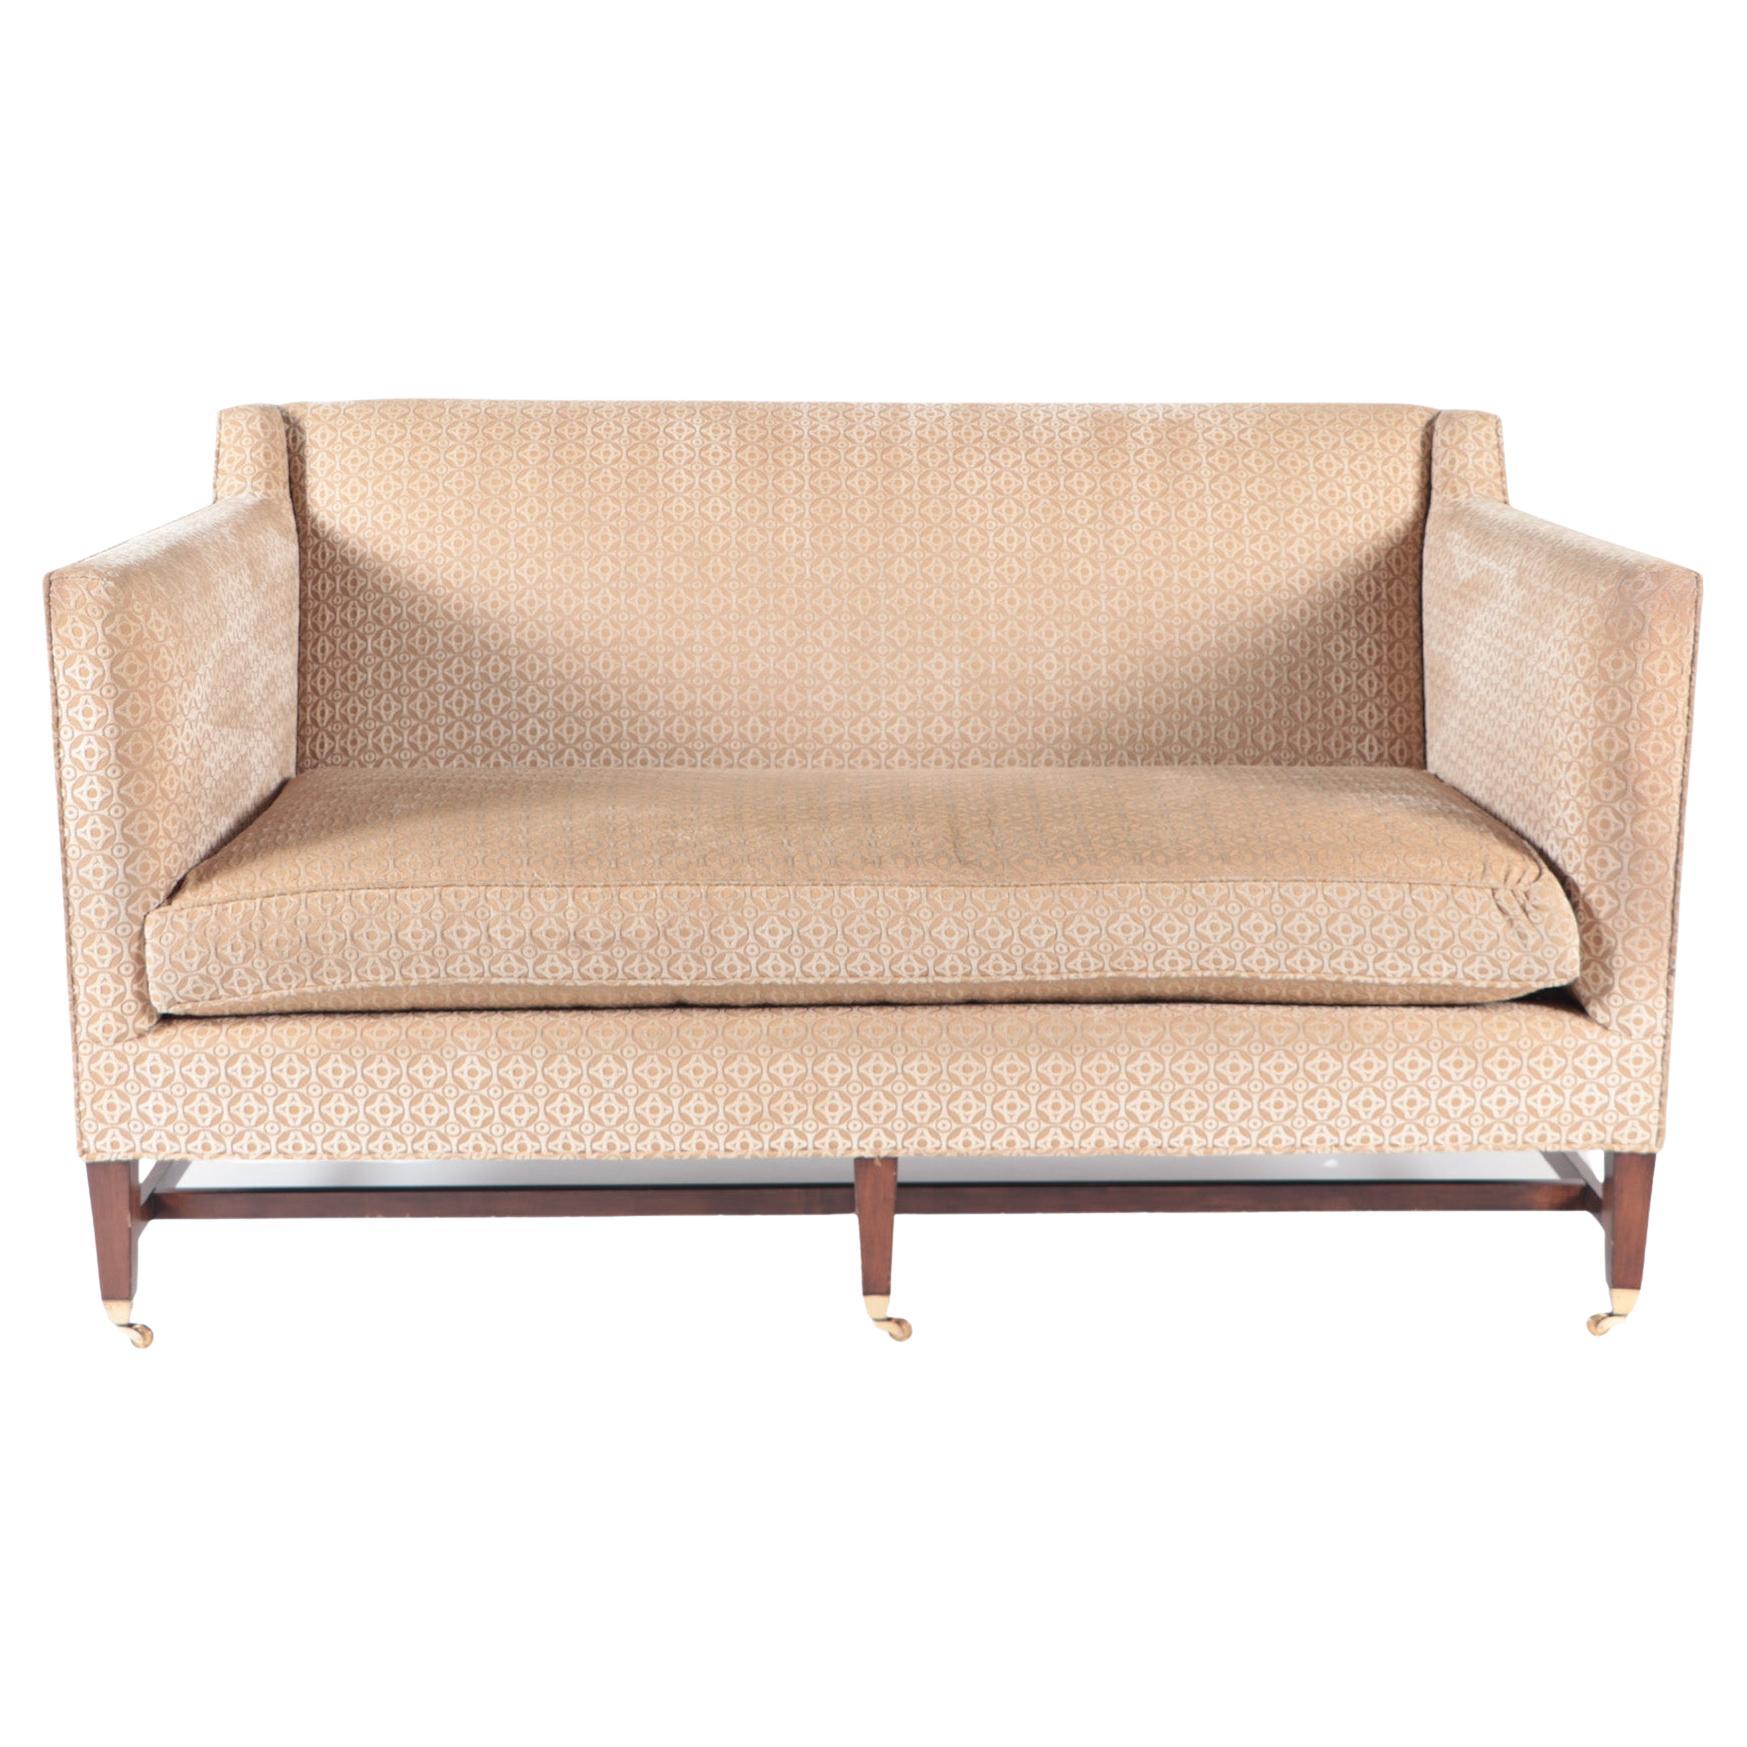 A Mid Century Modern style Edward Ferrell two seat upholstered sofa, late 20th C